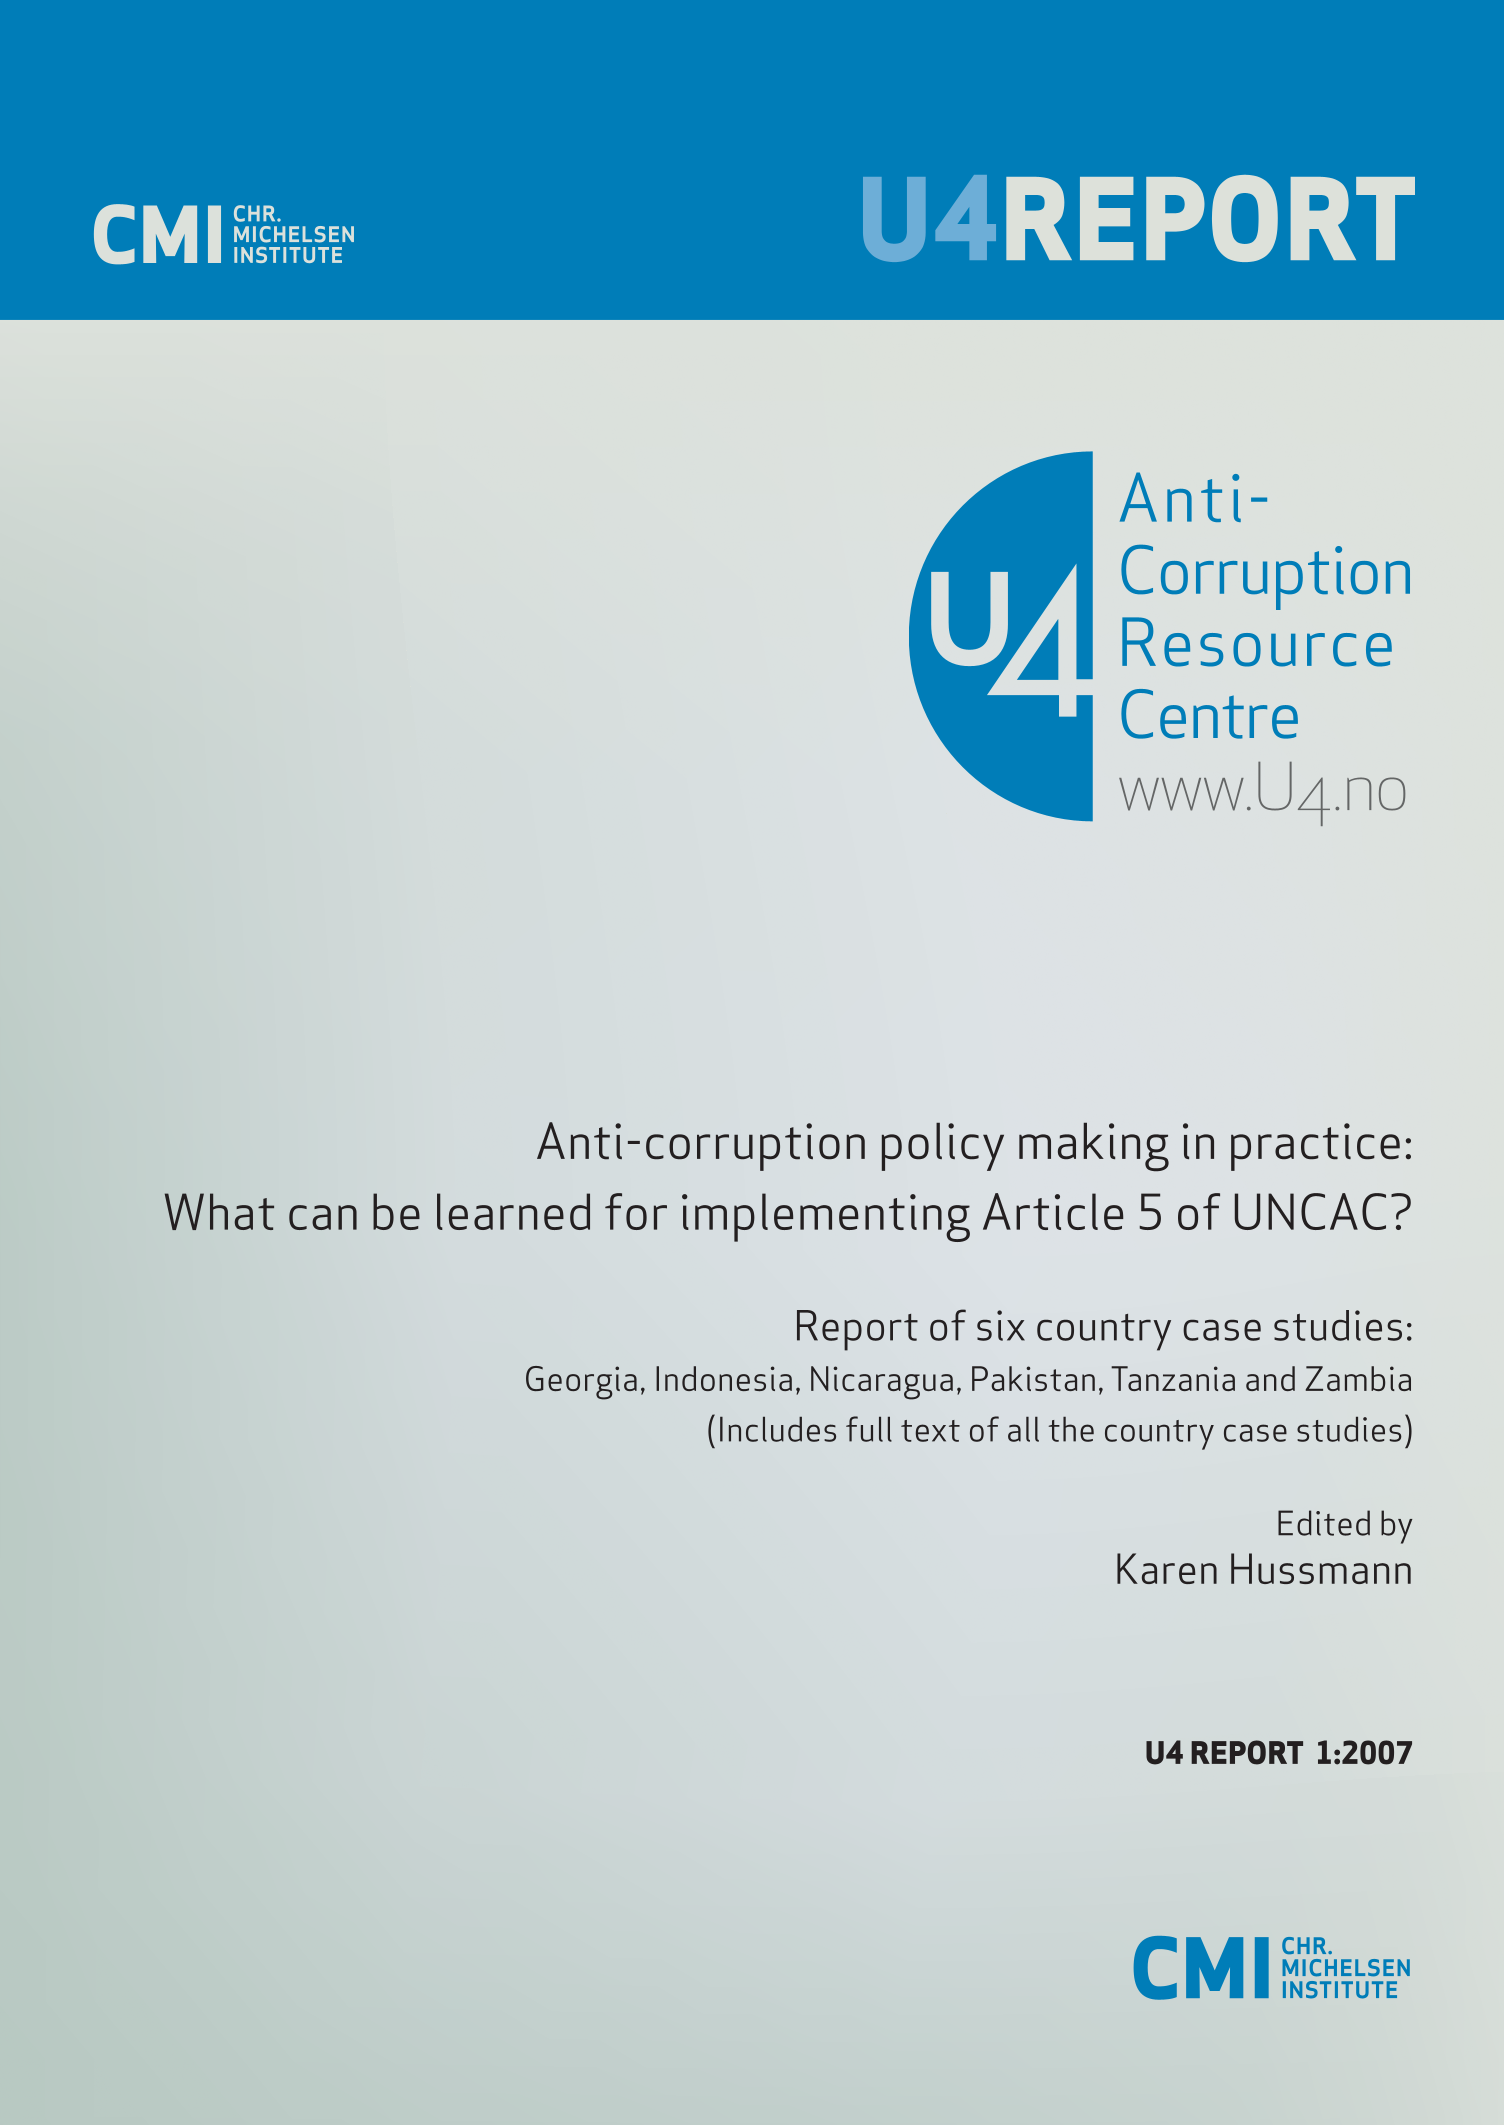 Anti-corruption policy making in practice: What can be learned for implementing Article 5 of UNCAC?